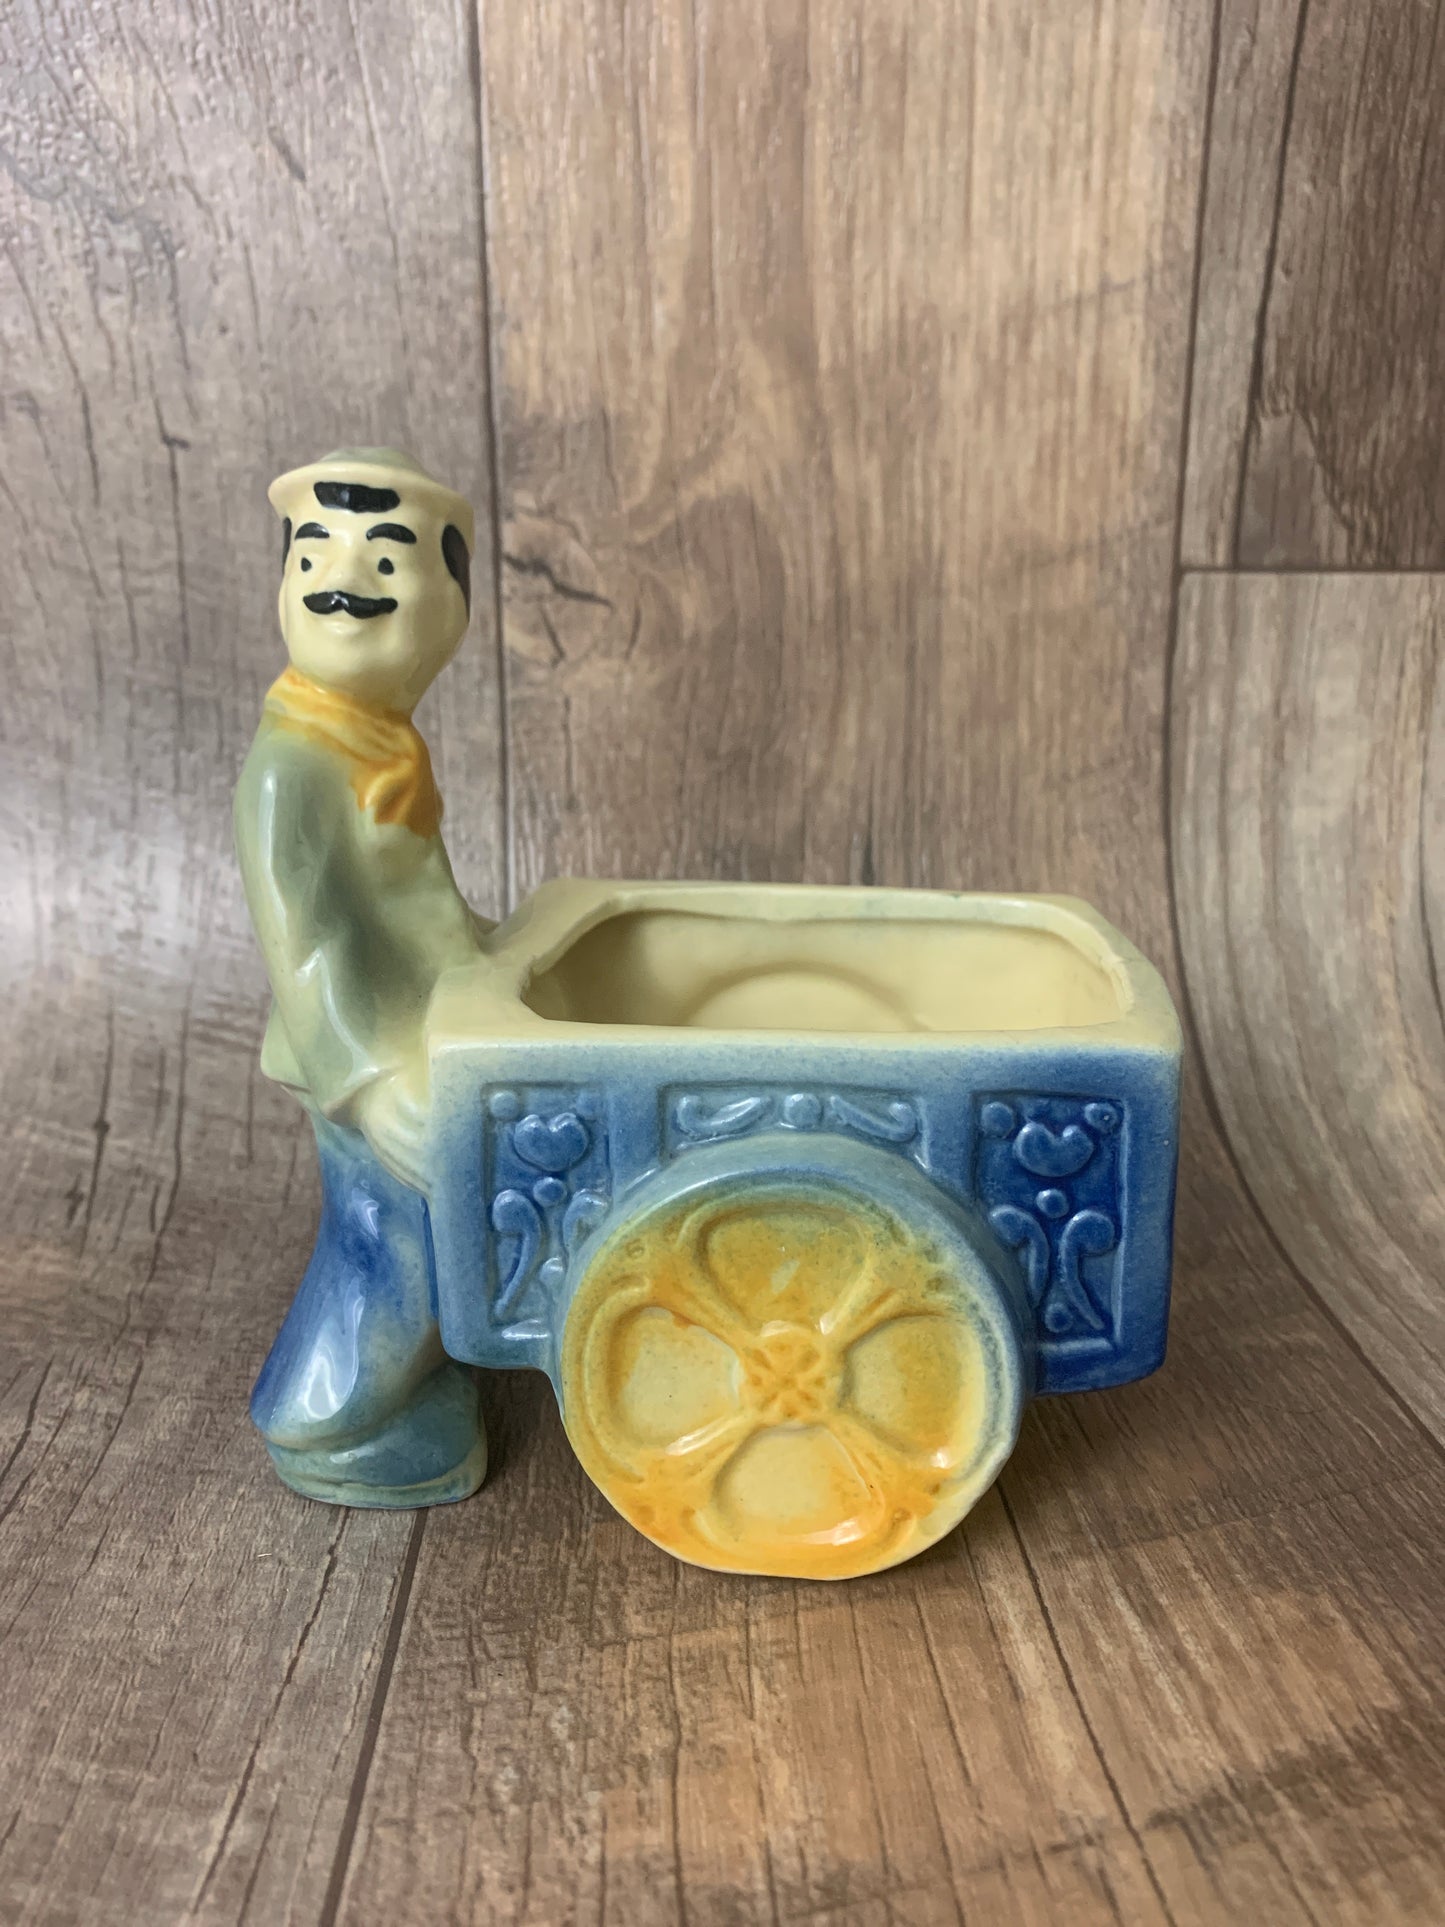 Vintage Ceramic Planter Man with a Flower Cart Blue and Yellow Vintage Home Decor